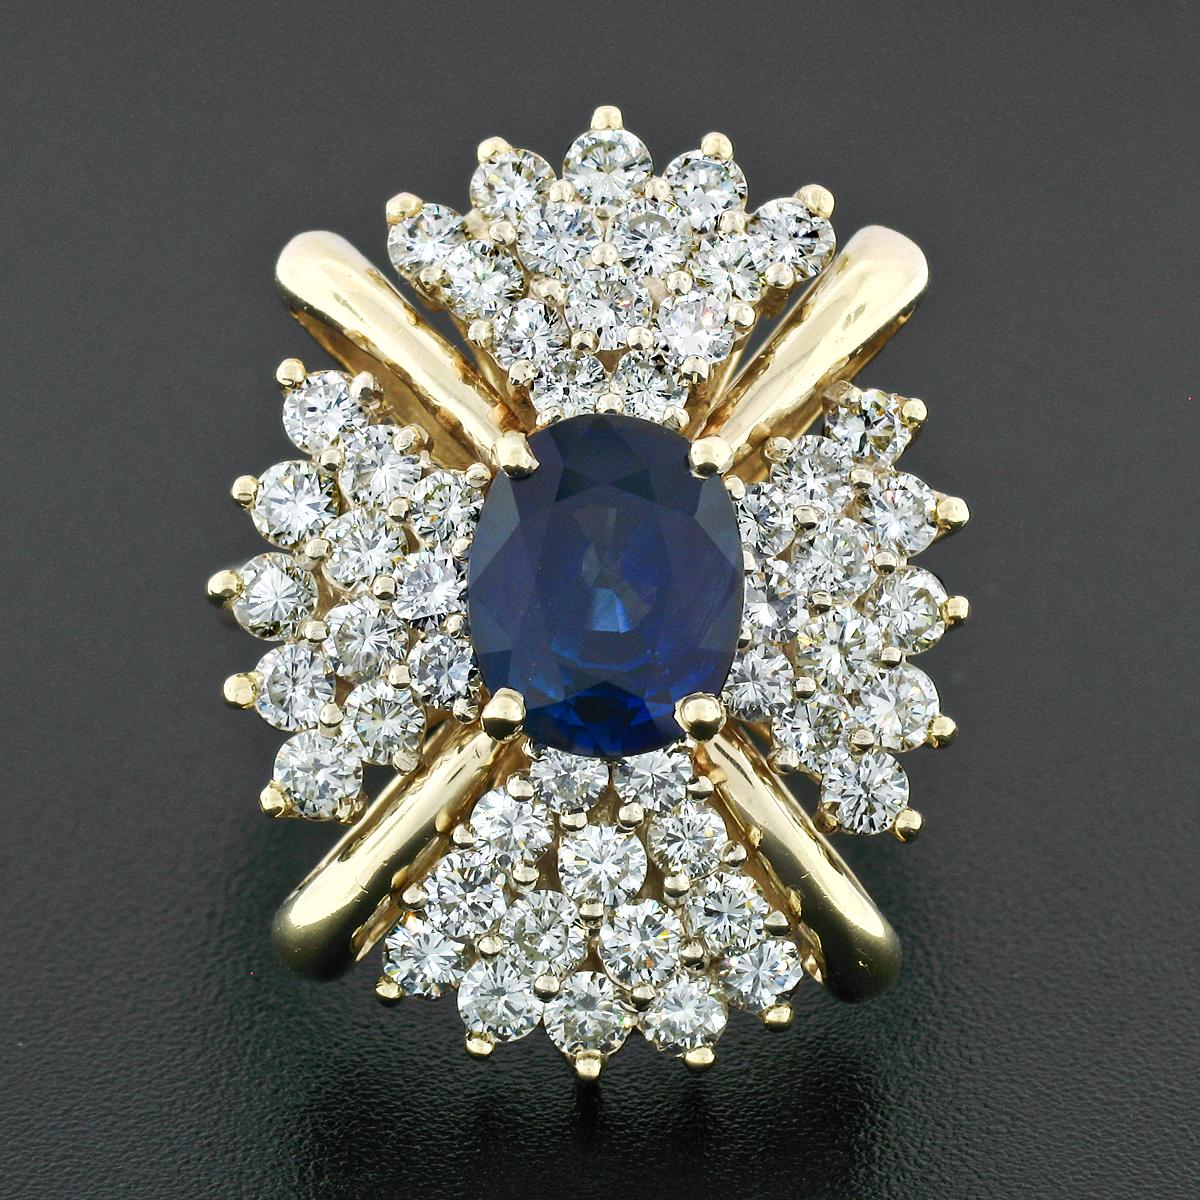 This large and spectacular sapphire and diamond statement ring was crafted from solid 14k yellow gold. The ring features an exactly 3.18 carat, GIA certified, oval cut Ceylon sapphire which is prong set at the center of its tiered oval design. The